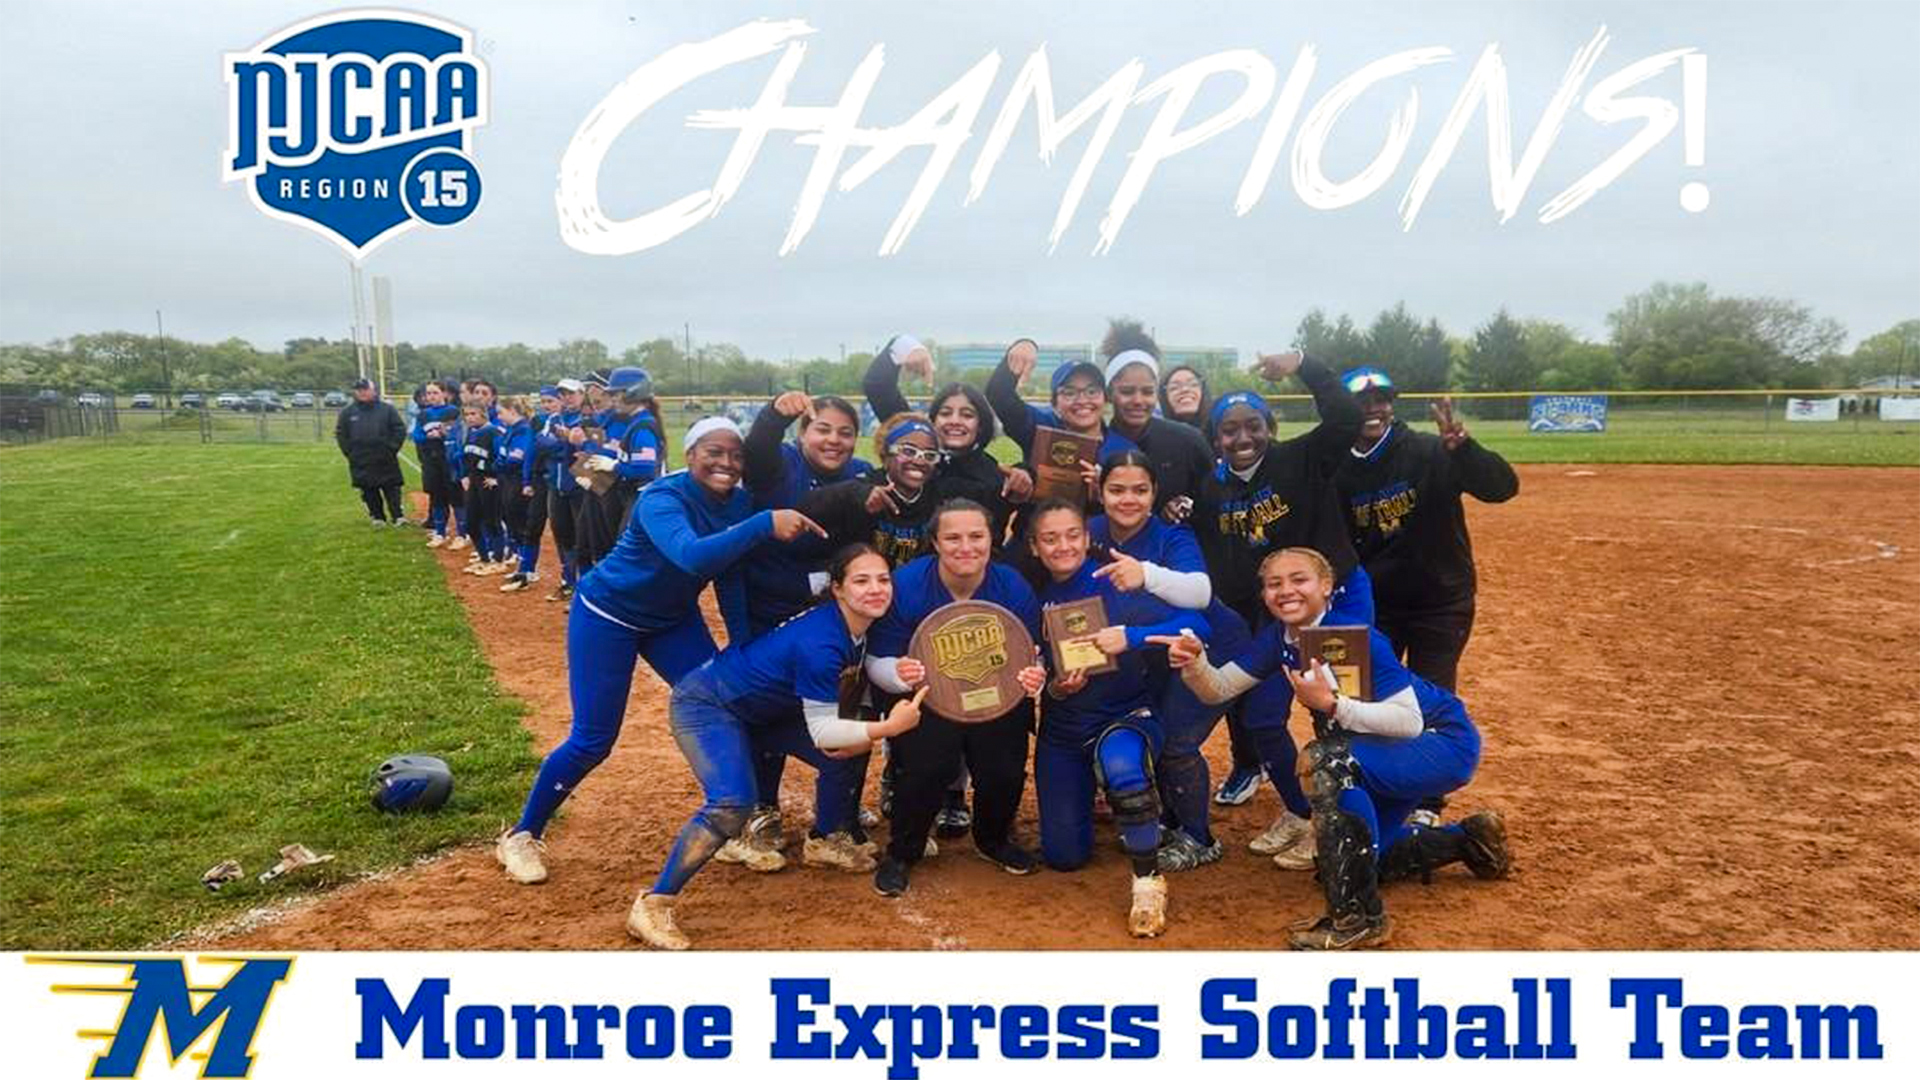 Monroe-Express Softball Defeats Top Seed Suffolk Community College To Capture The Second Region XV Championship&nbsp;In Program History